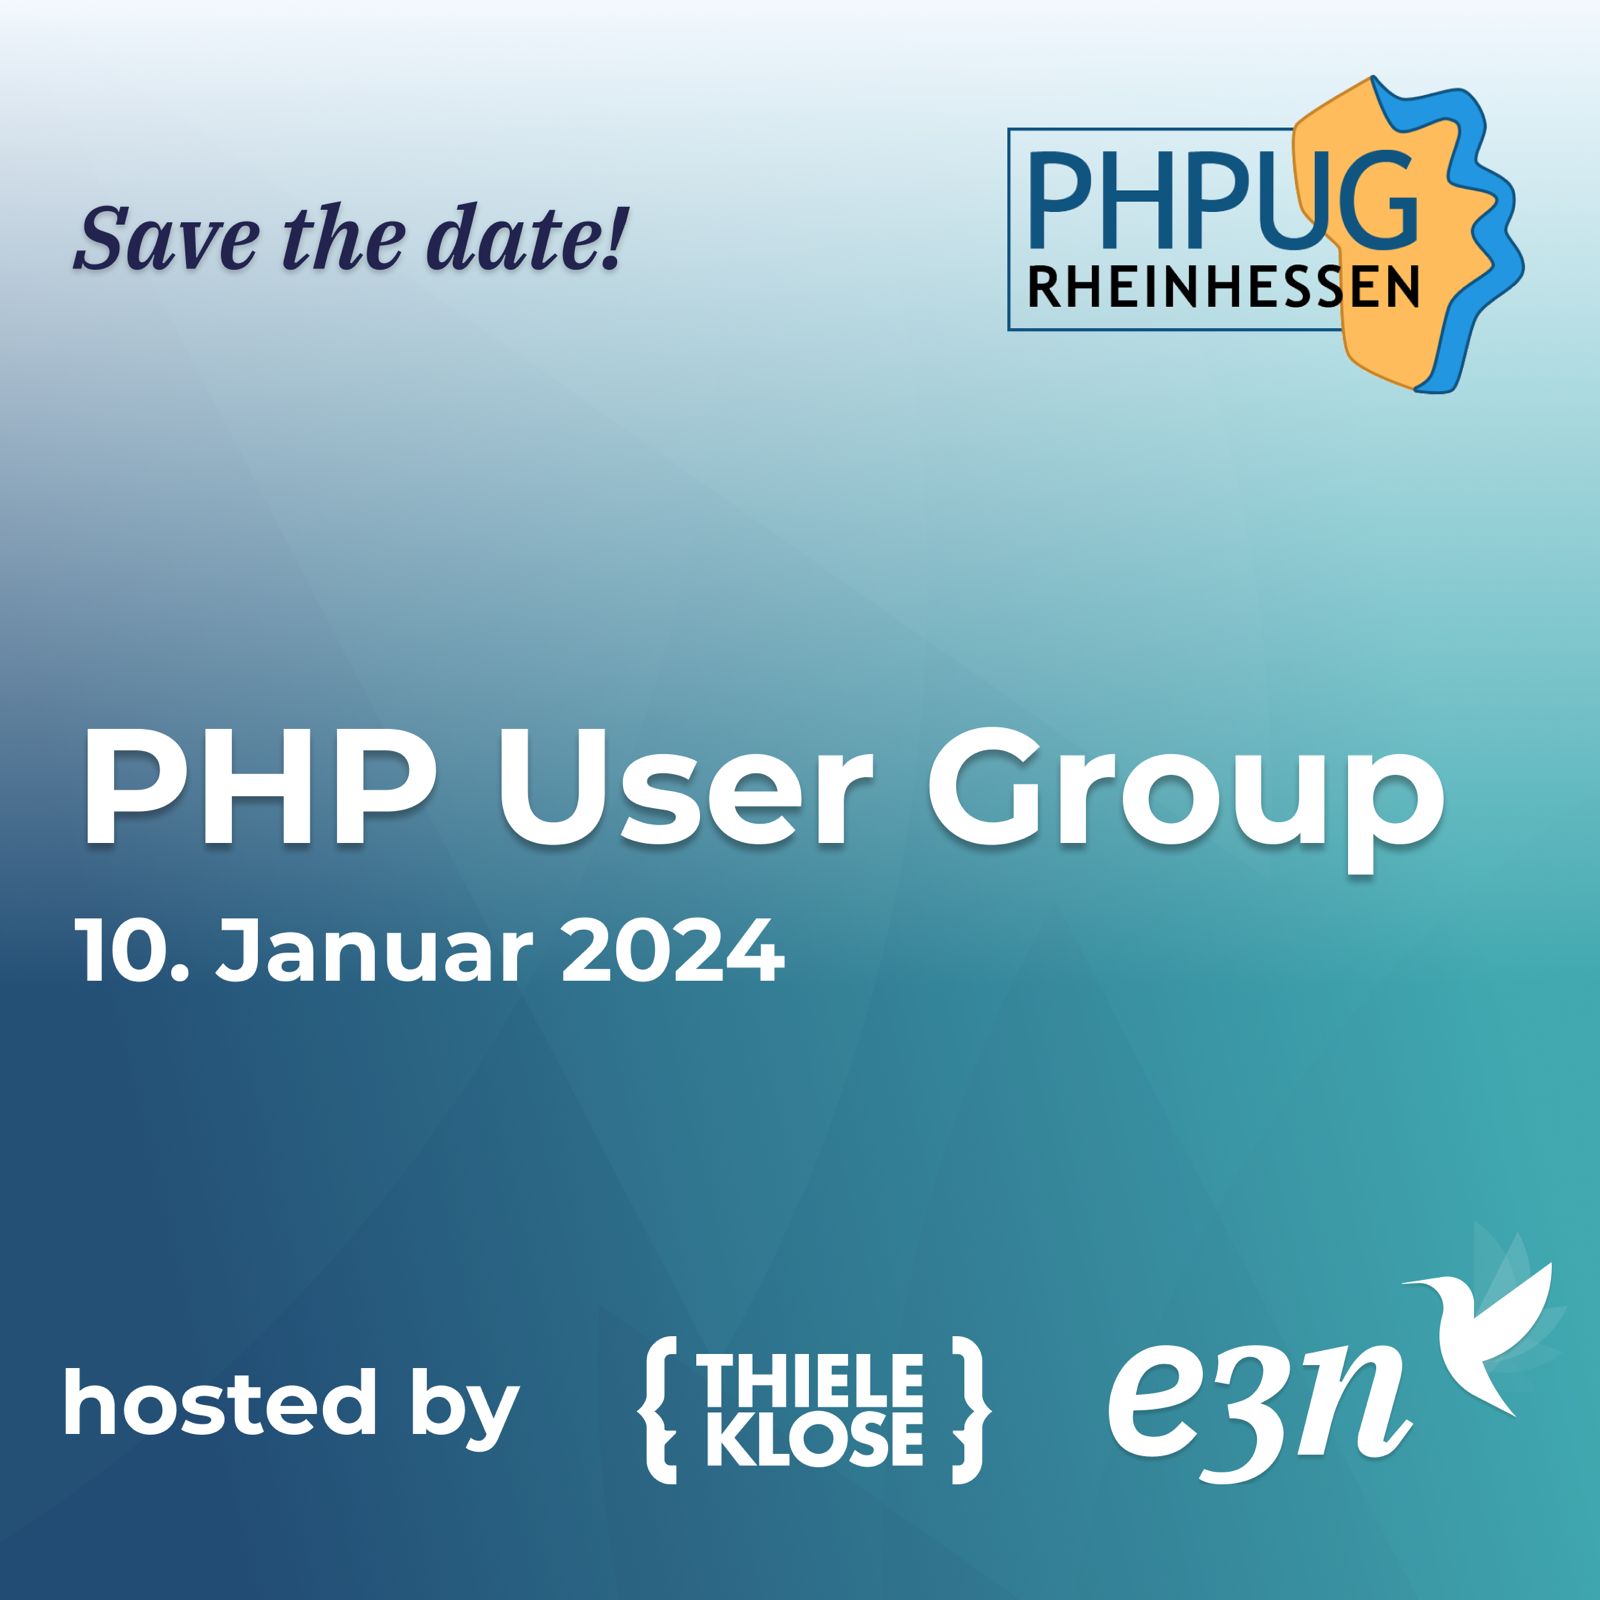 Save the date! PHP User Group Rheinhessen, 10. Januar 2024, hosted by Thiele & Klose und e3n.